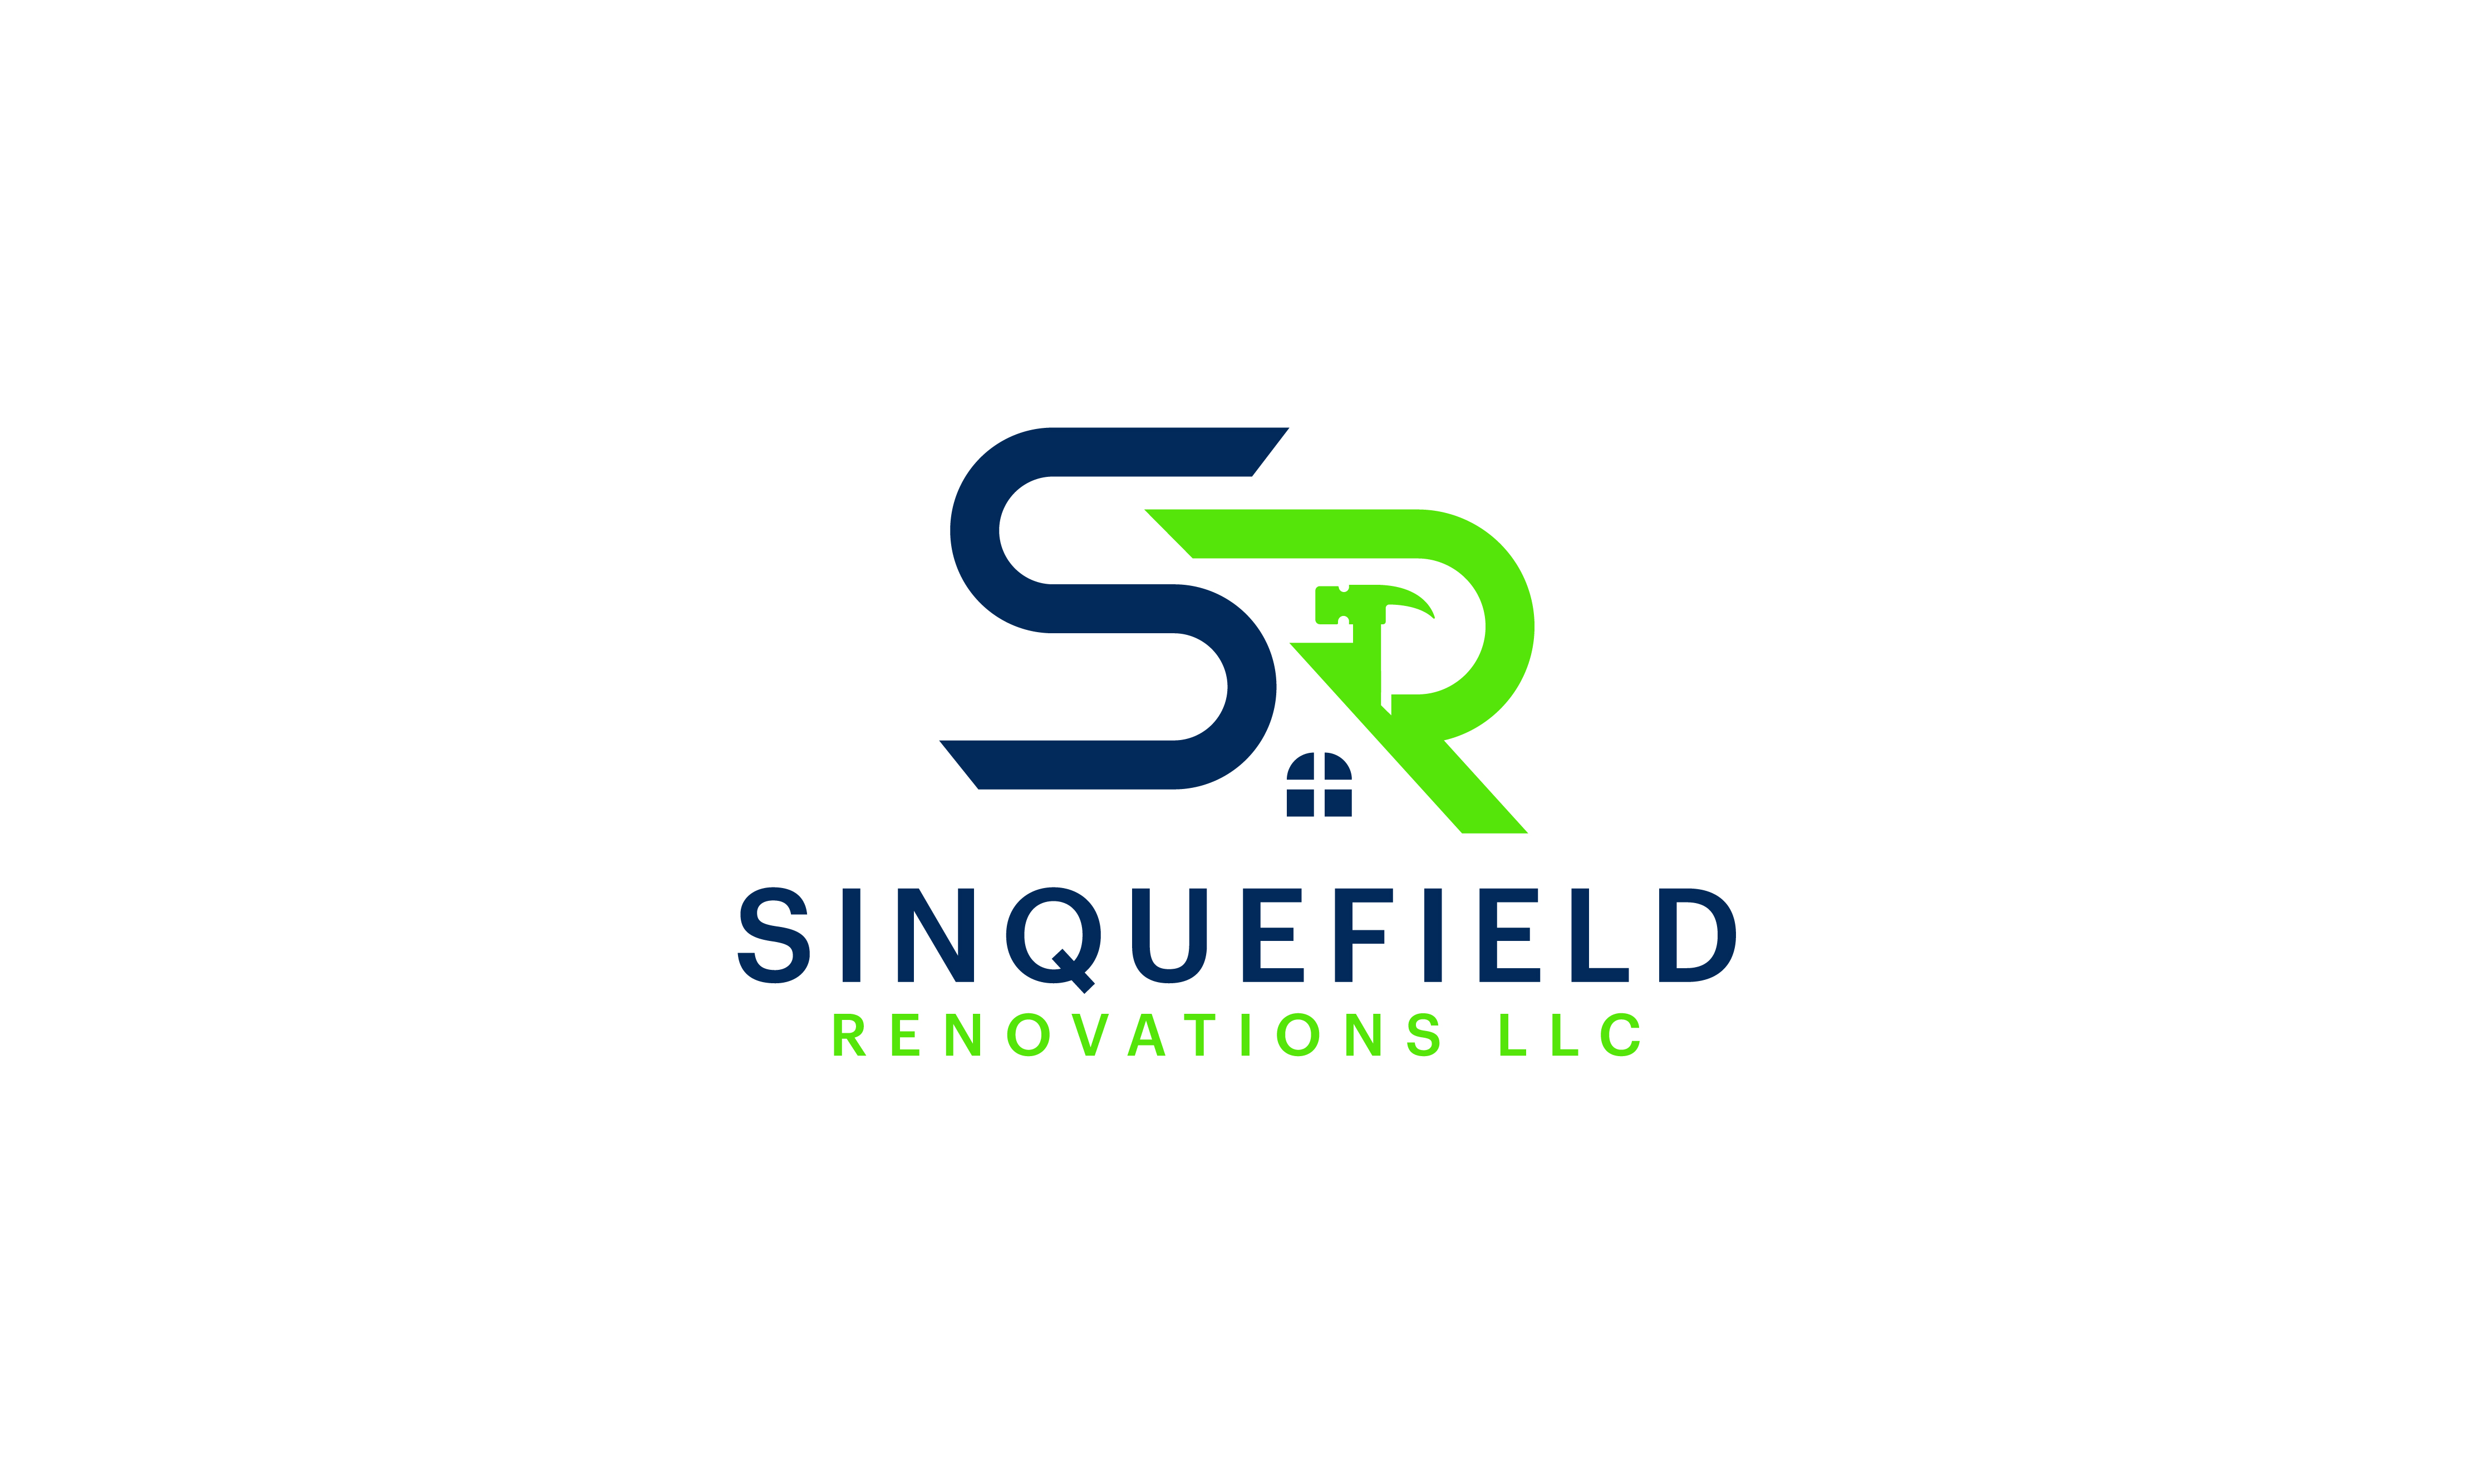 Sinquefield Renovations logo in light green and dark blue